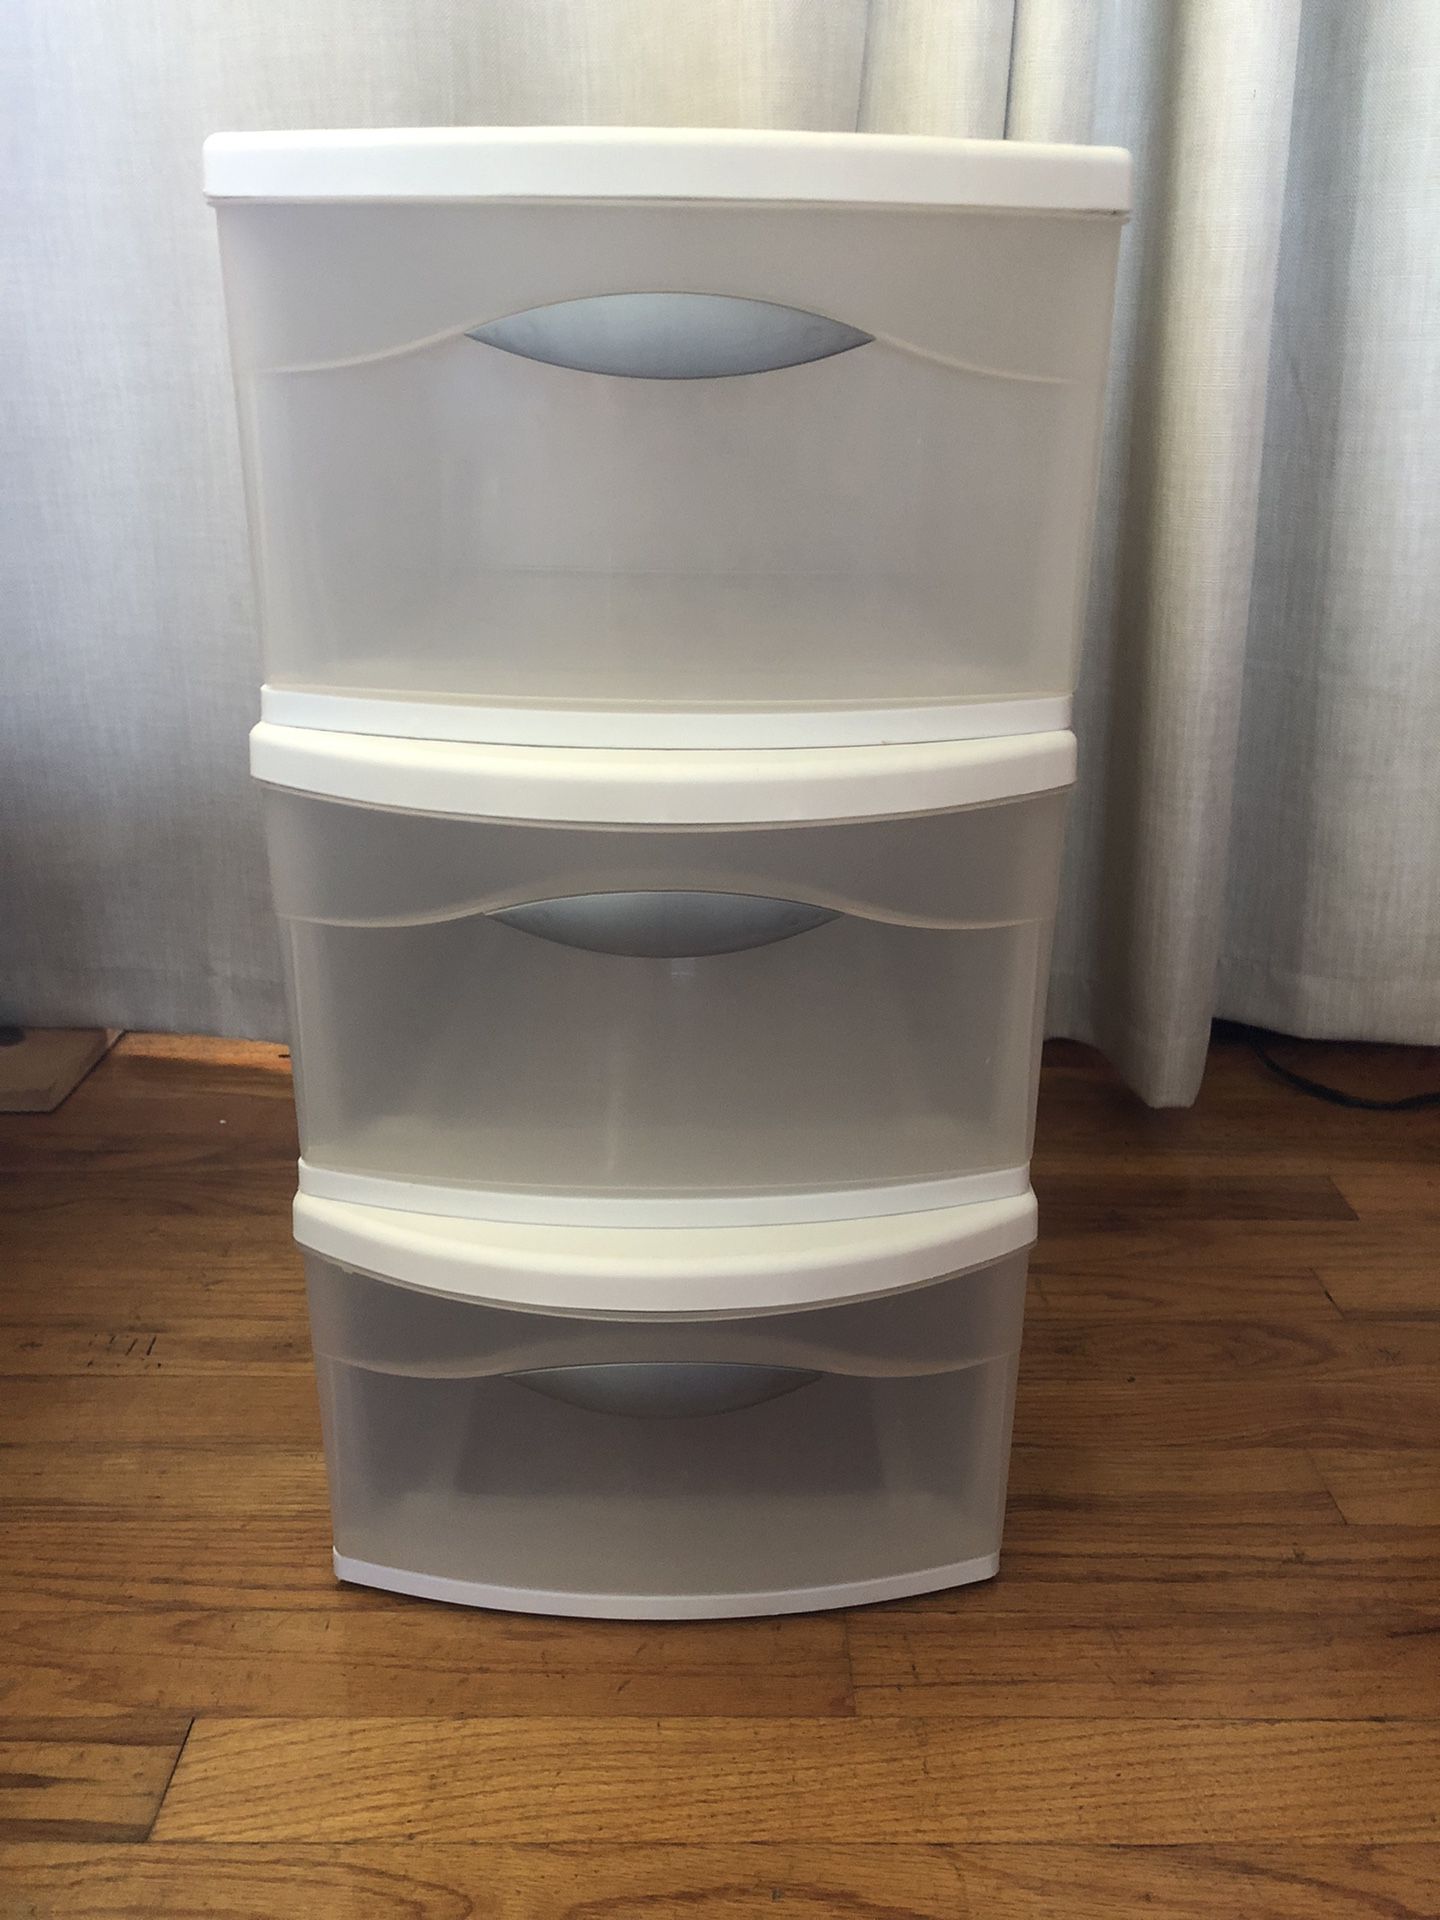 3 Sterilite Stackable Storage Drawers - $15/All